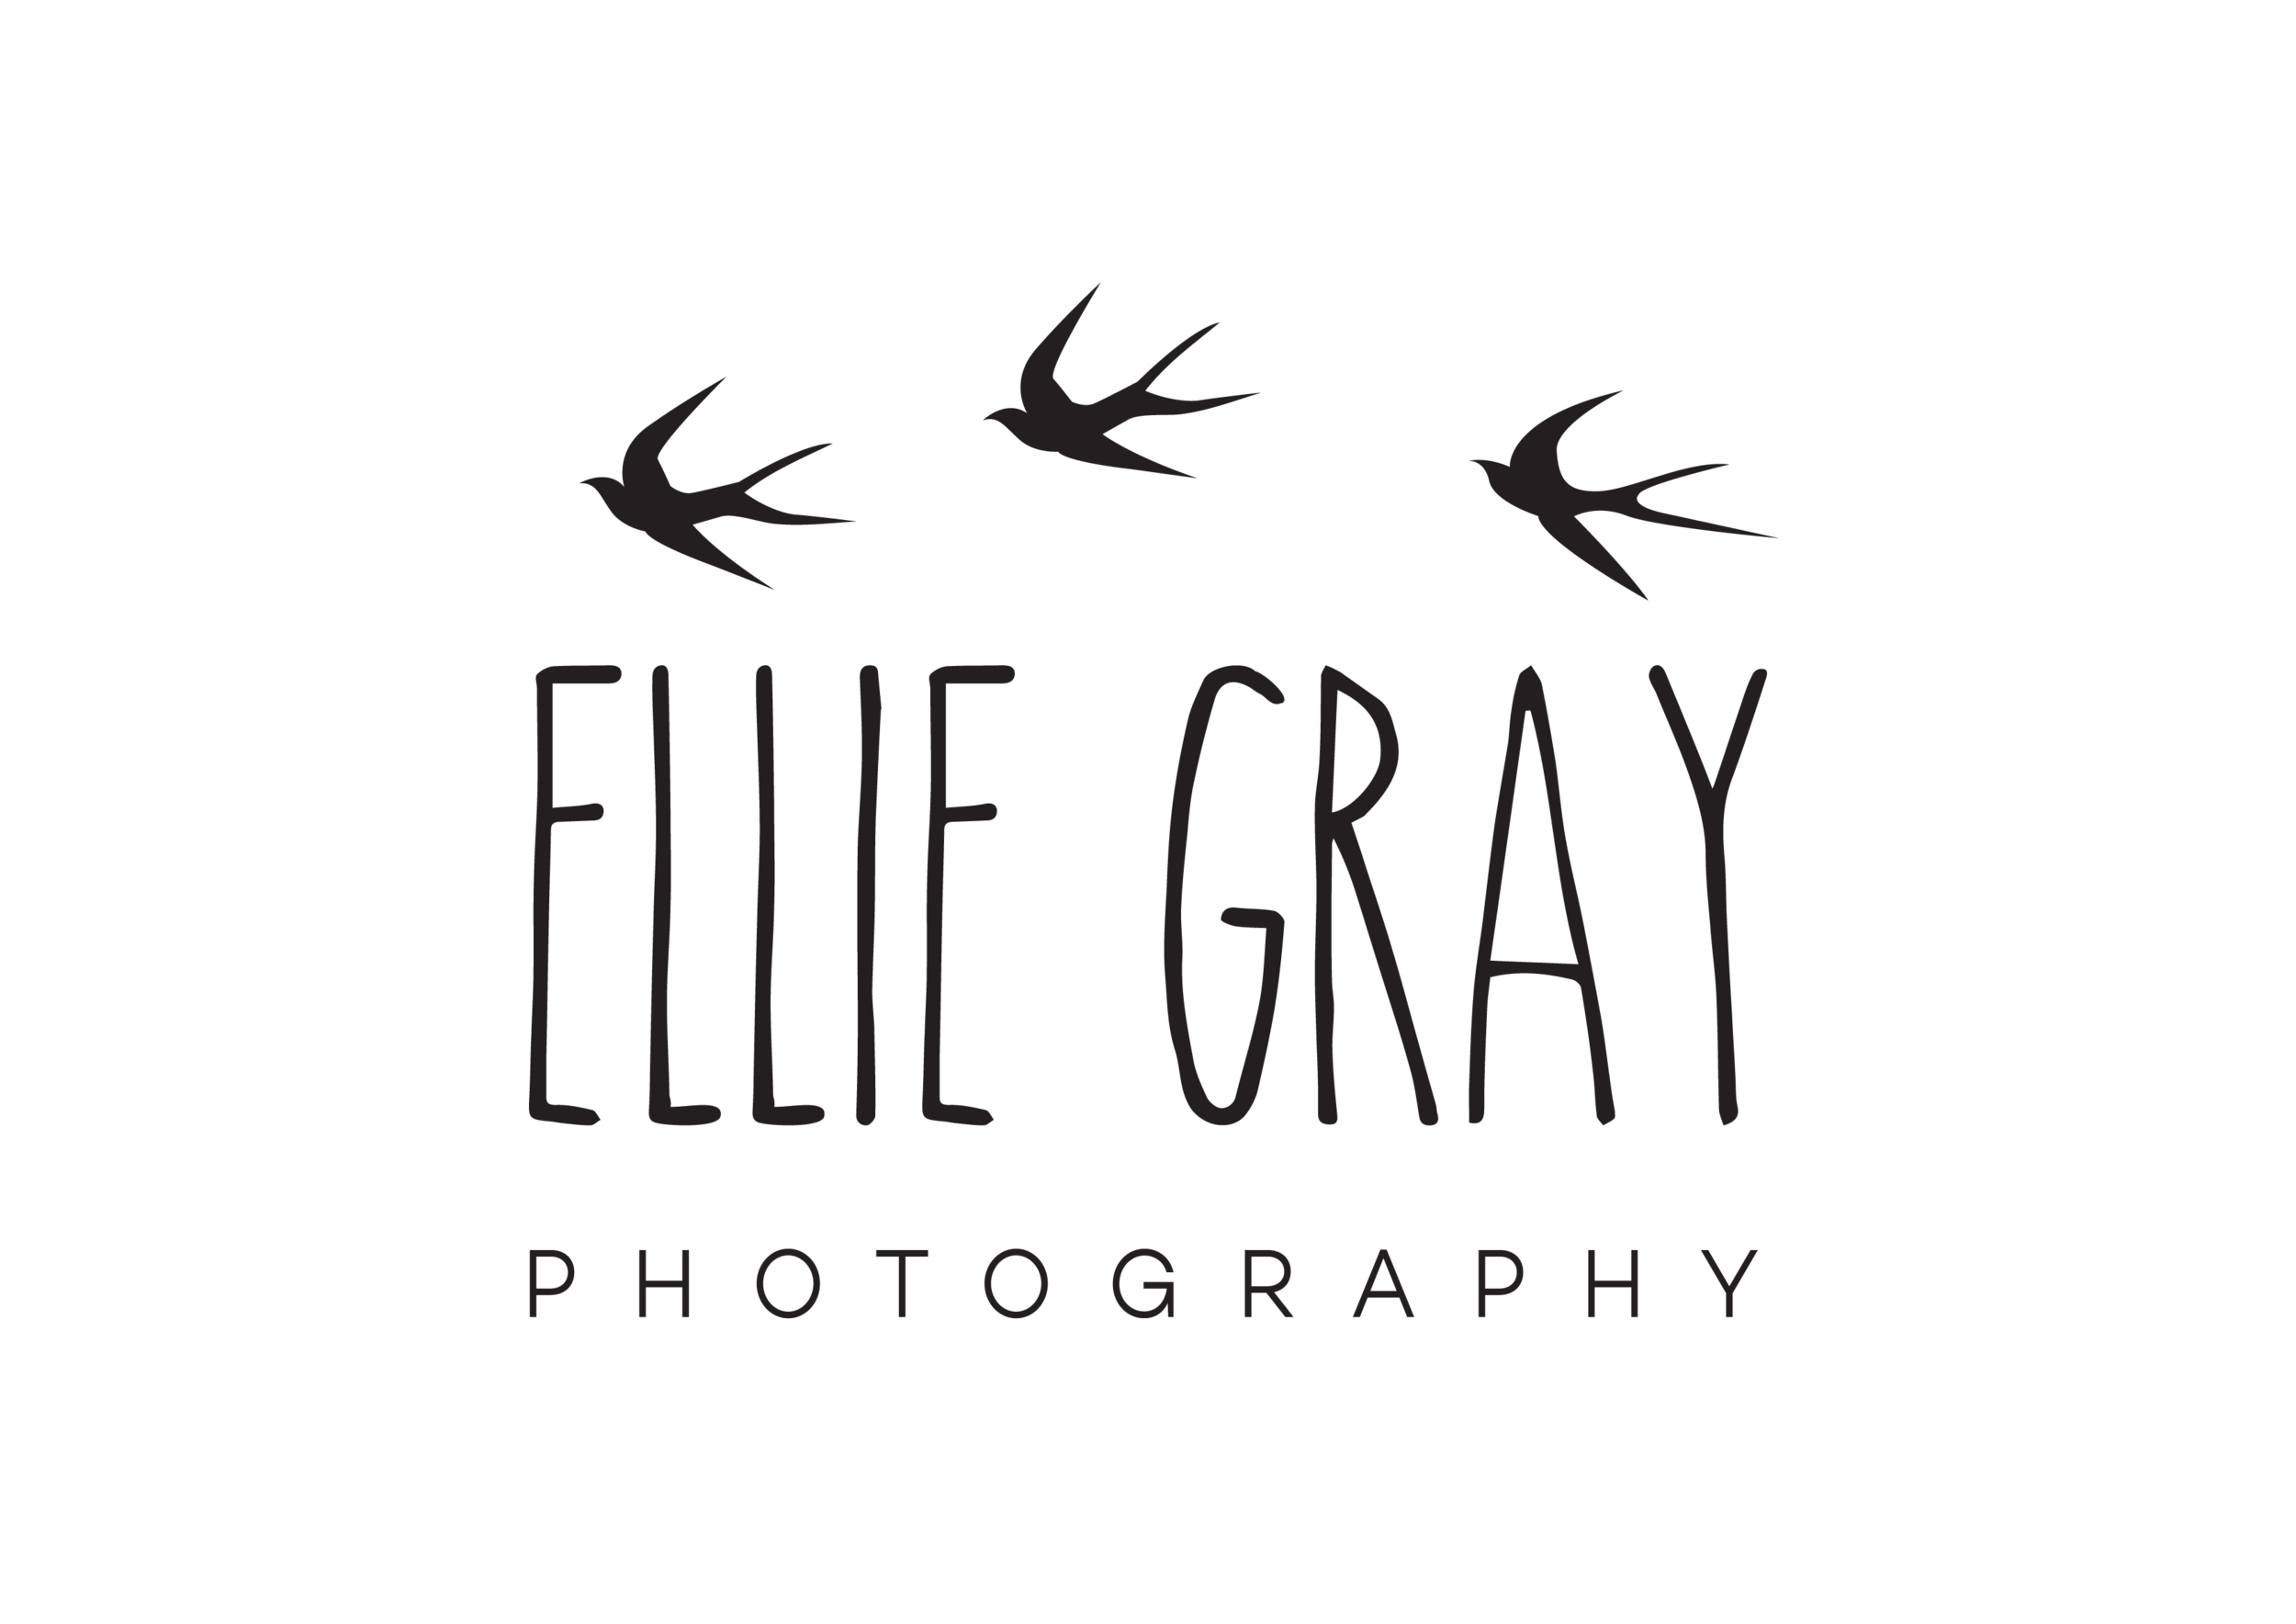 Ellie Gray Photography